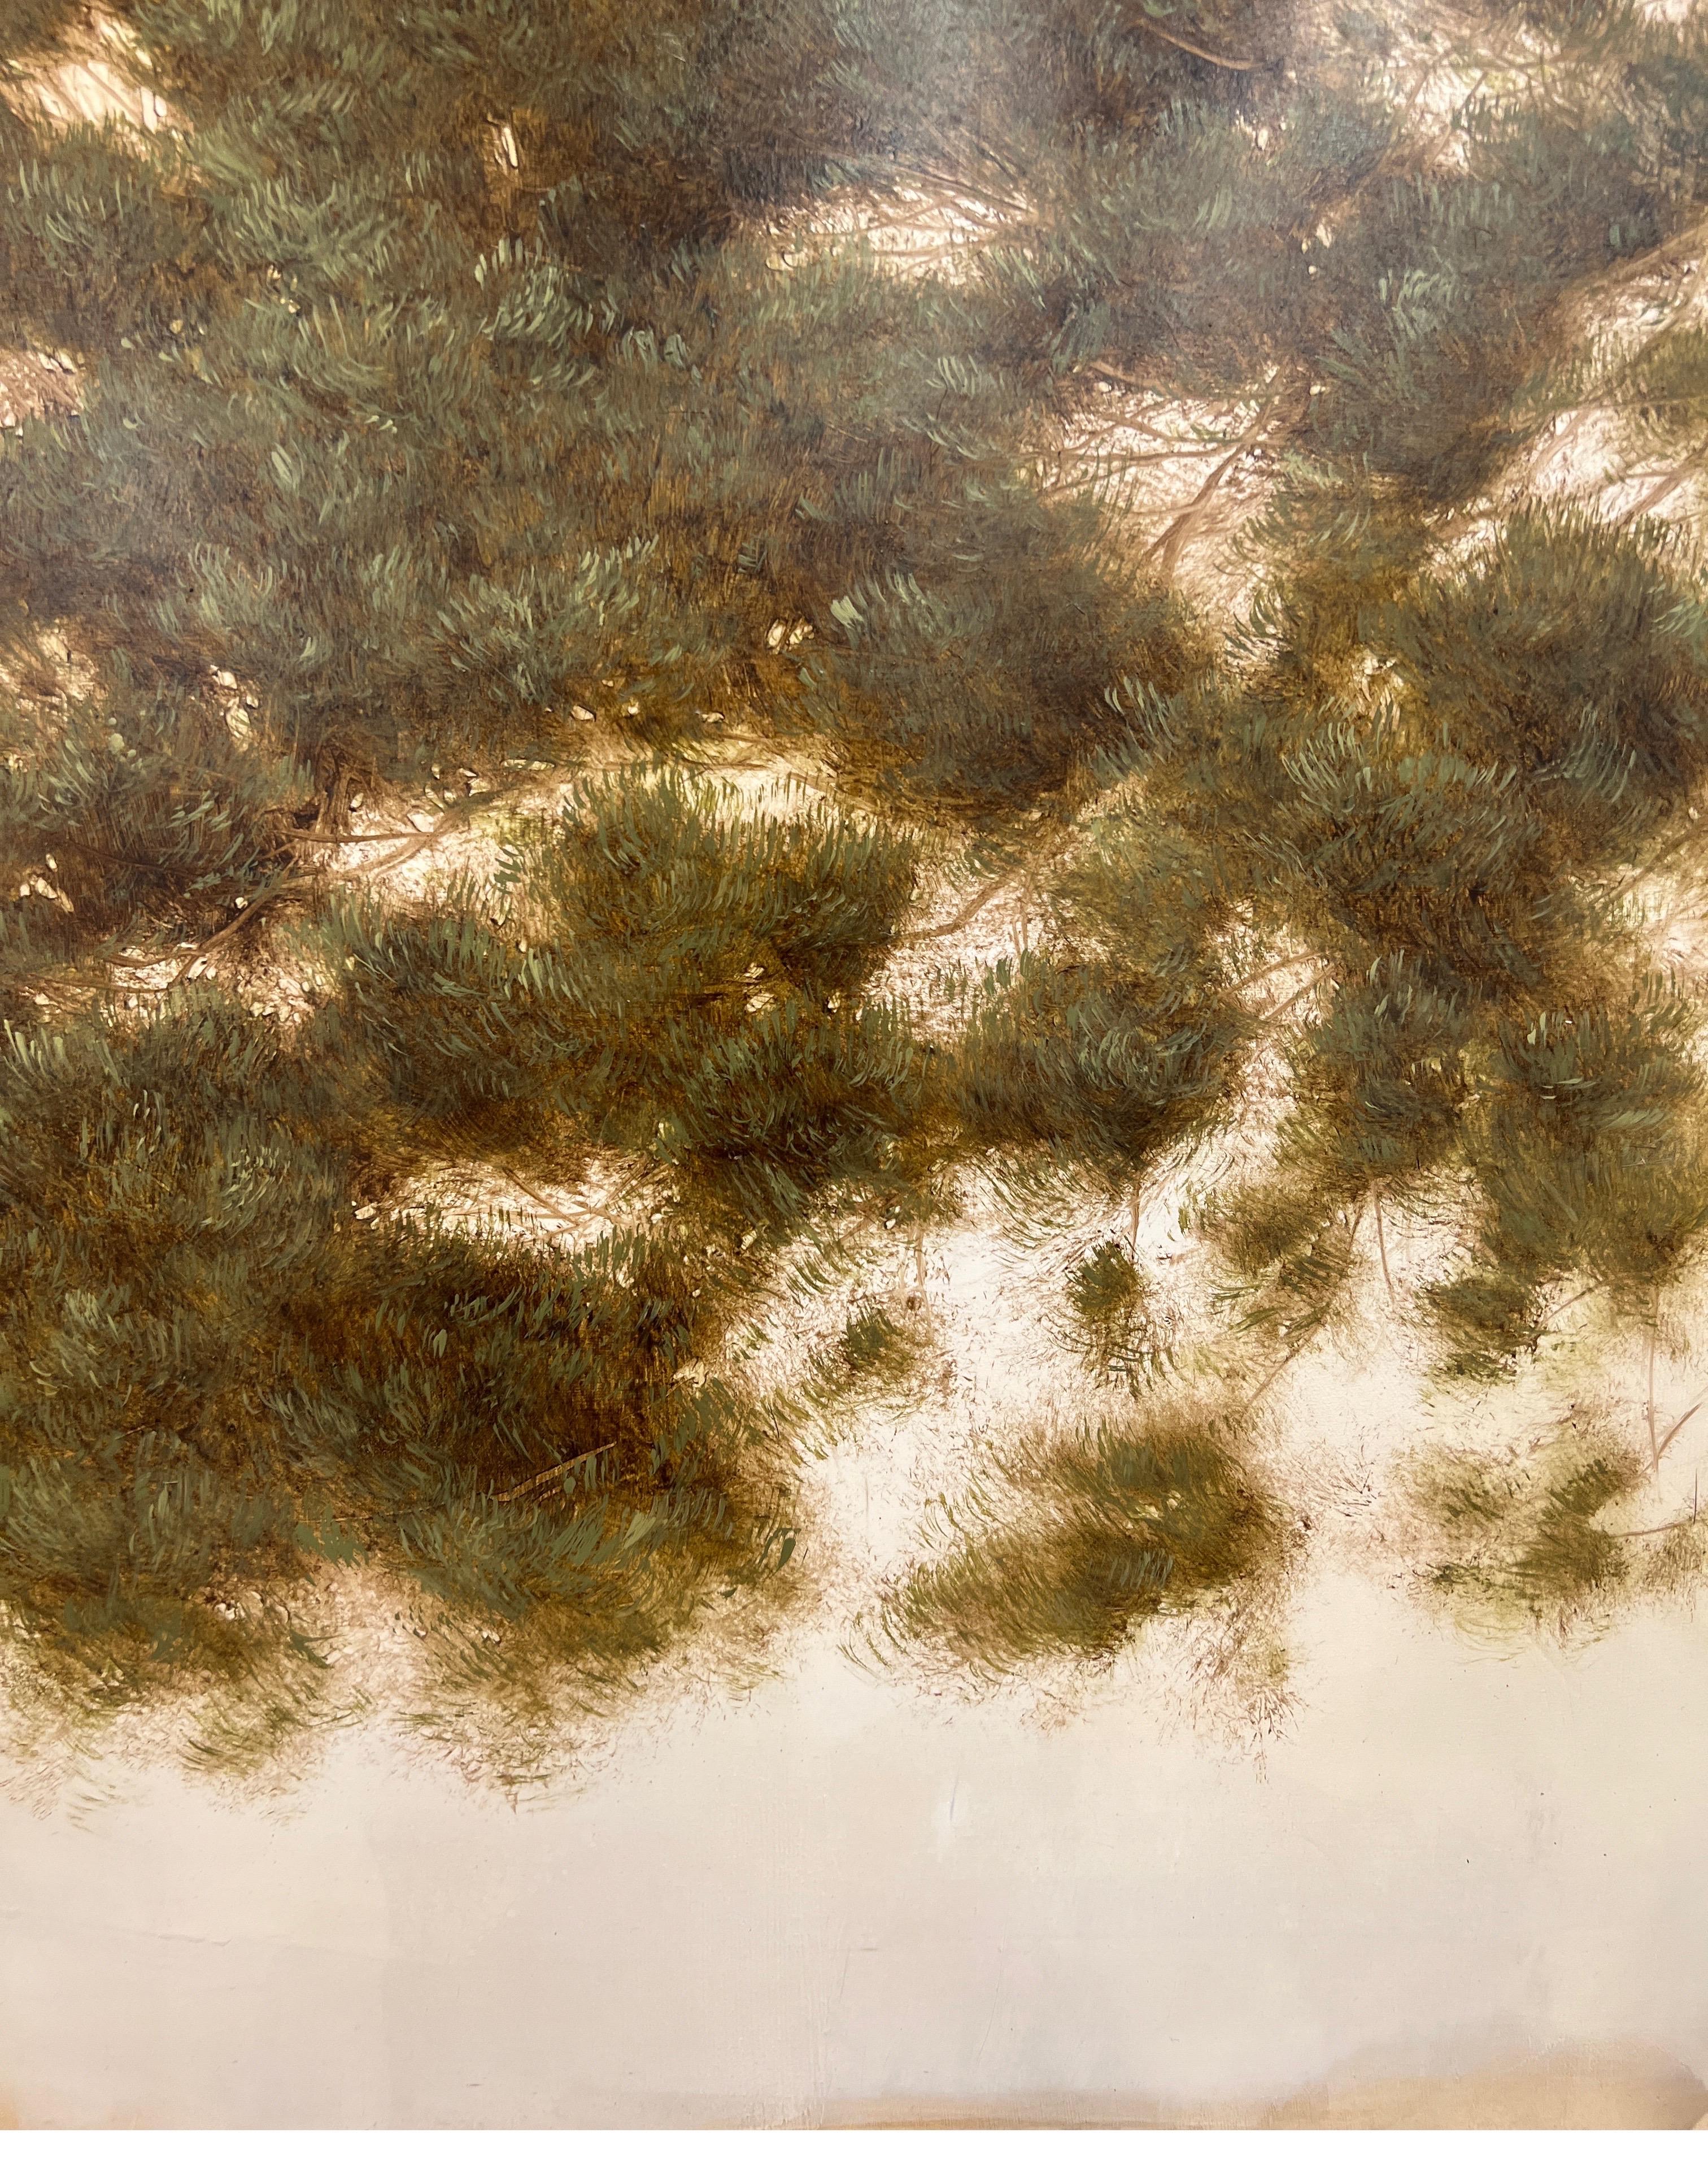 Mid-Afternoon Dream I by Jessica Pisano, Large Contemporary Tree Painting 2